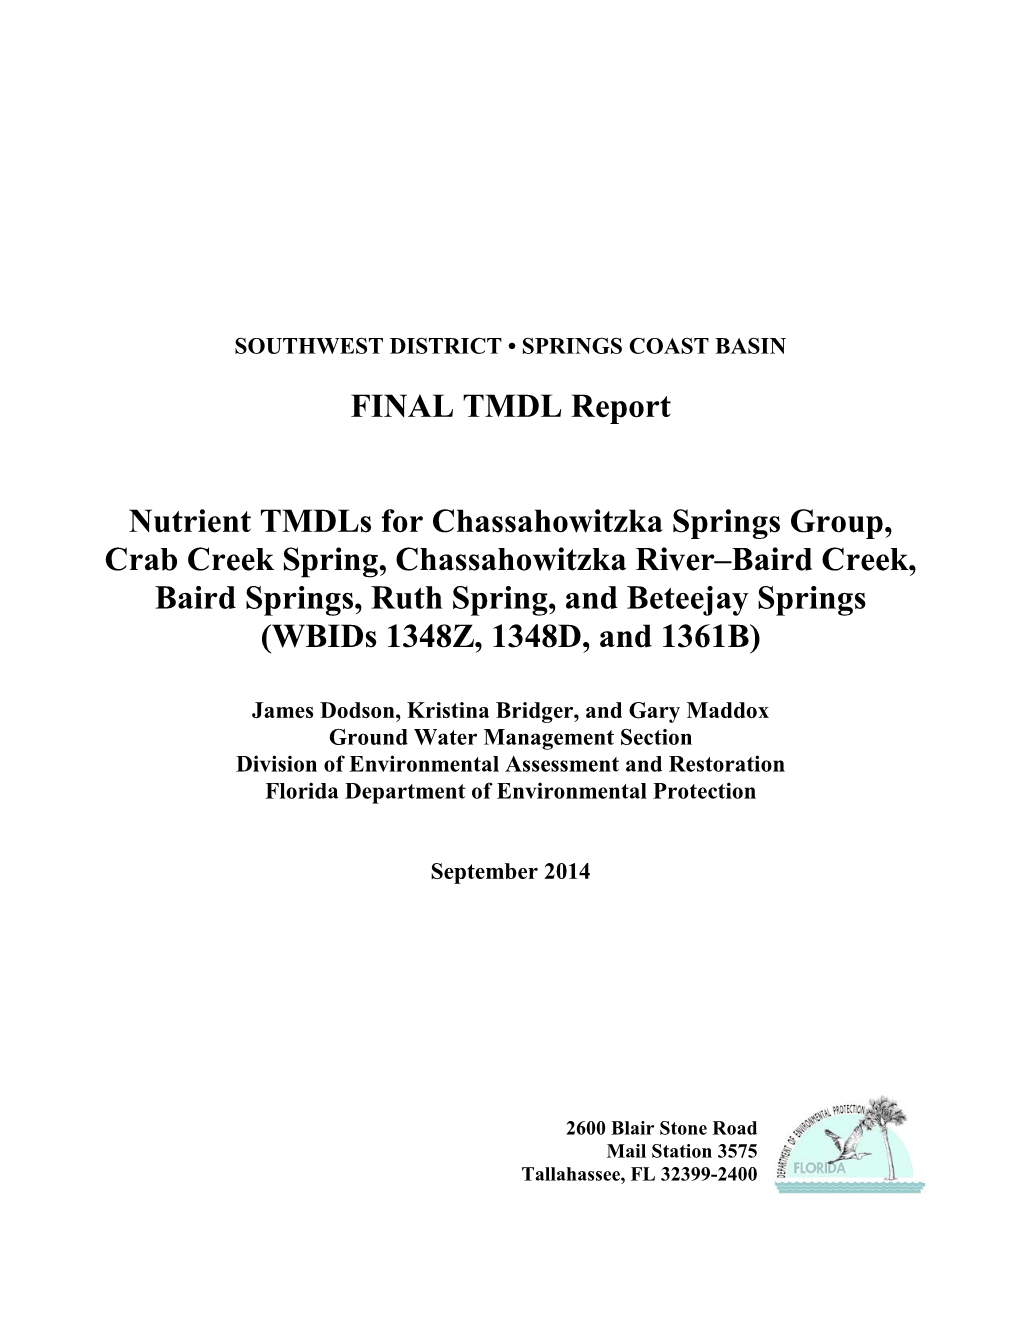 Nutrient Tmdls for Chassahowitzka Springs Group, Crab Creek Spring